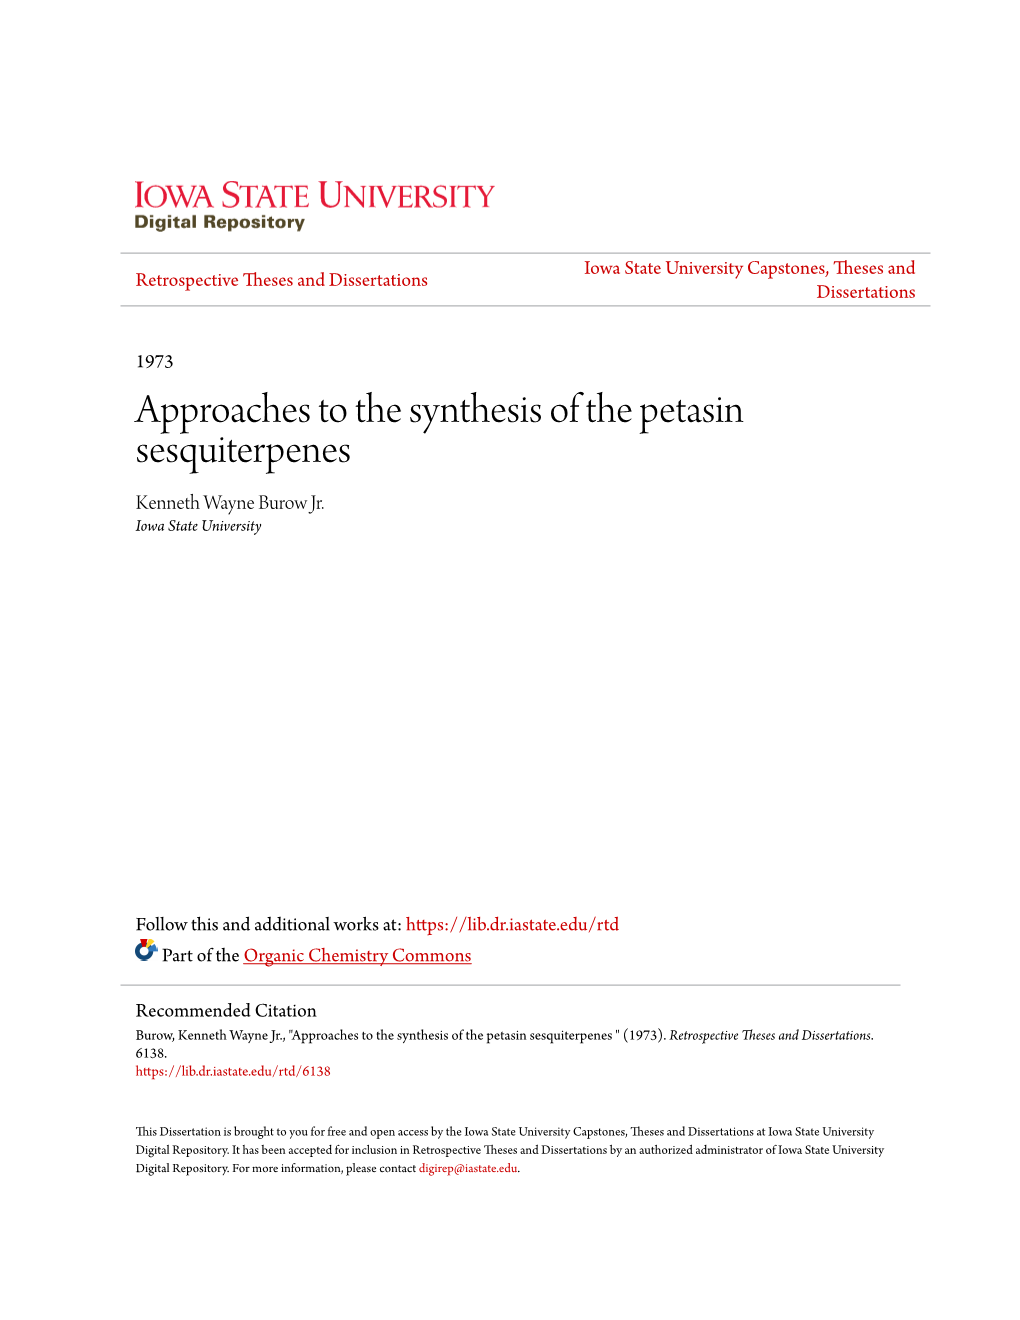 Approaches to the Synthesis of the Petasin Sesquiterpenes Kenneth Wayne Burow Jr